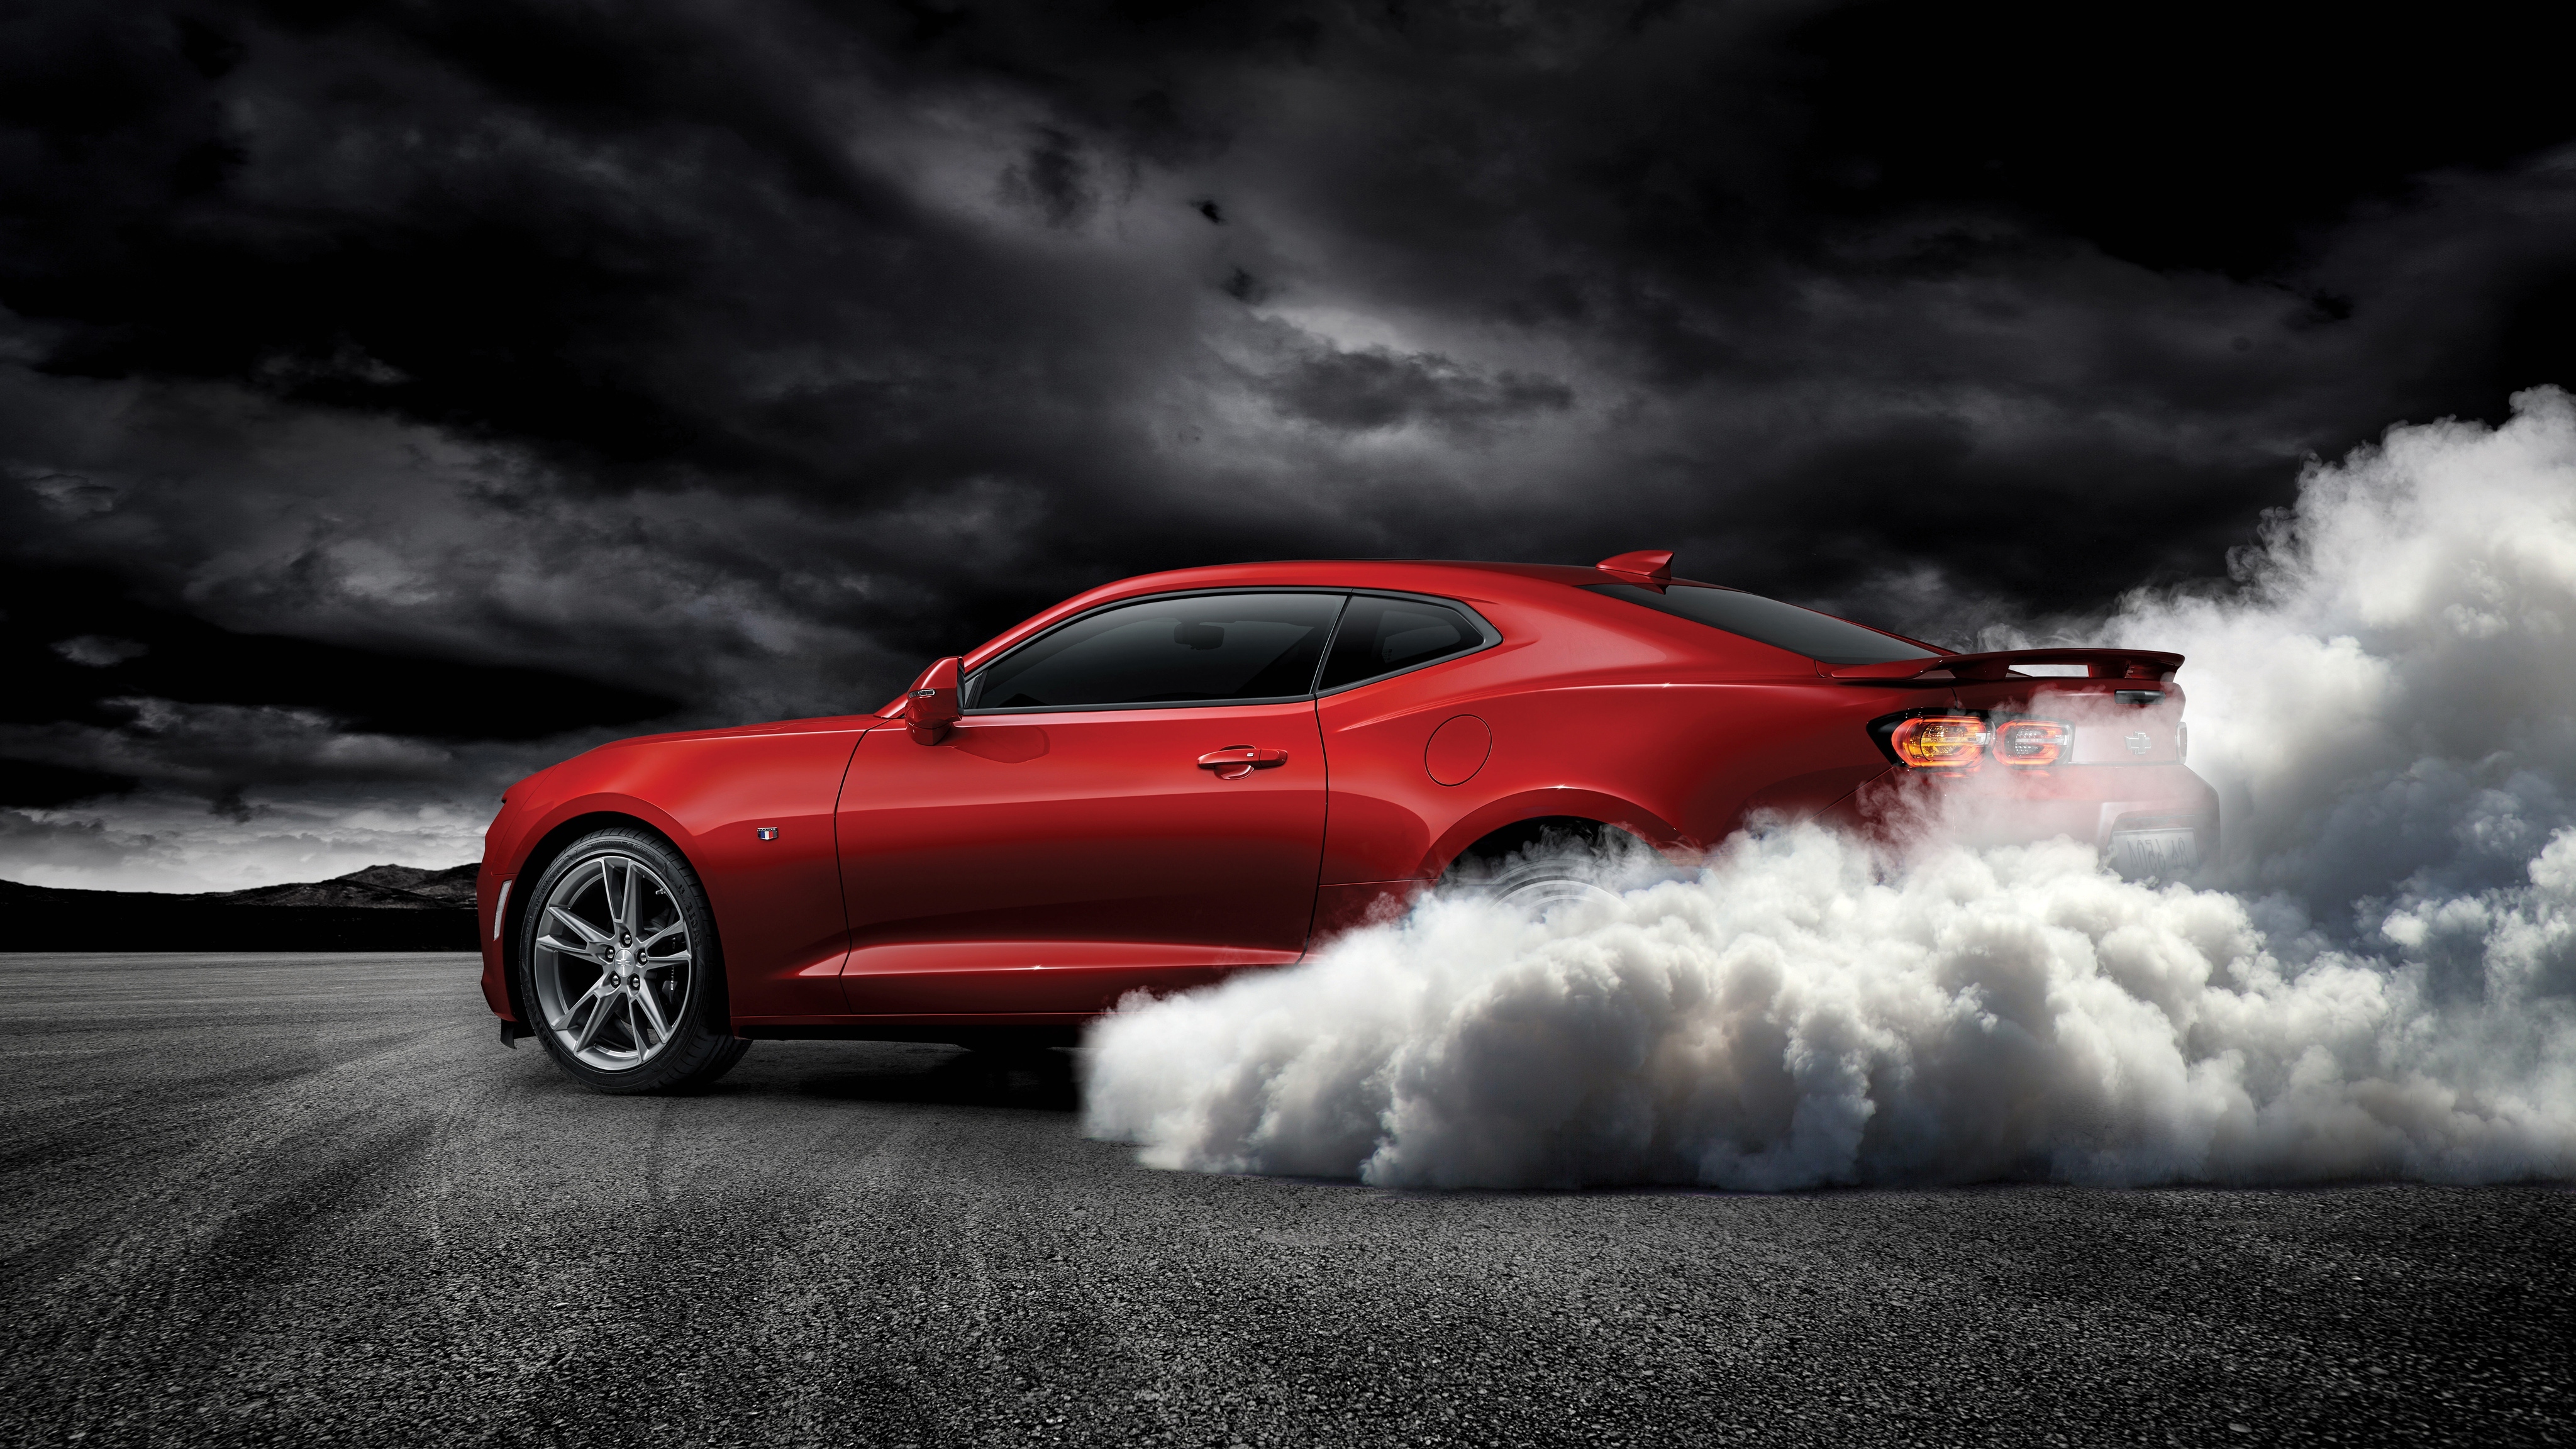 Wallpaper Red, Smoke, Muscle Cars, Chevrolet Camaro Ss 2019:4096x2304